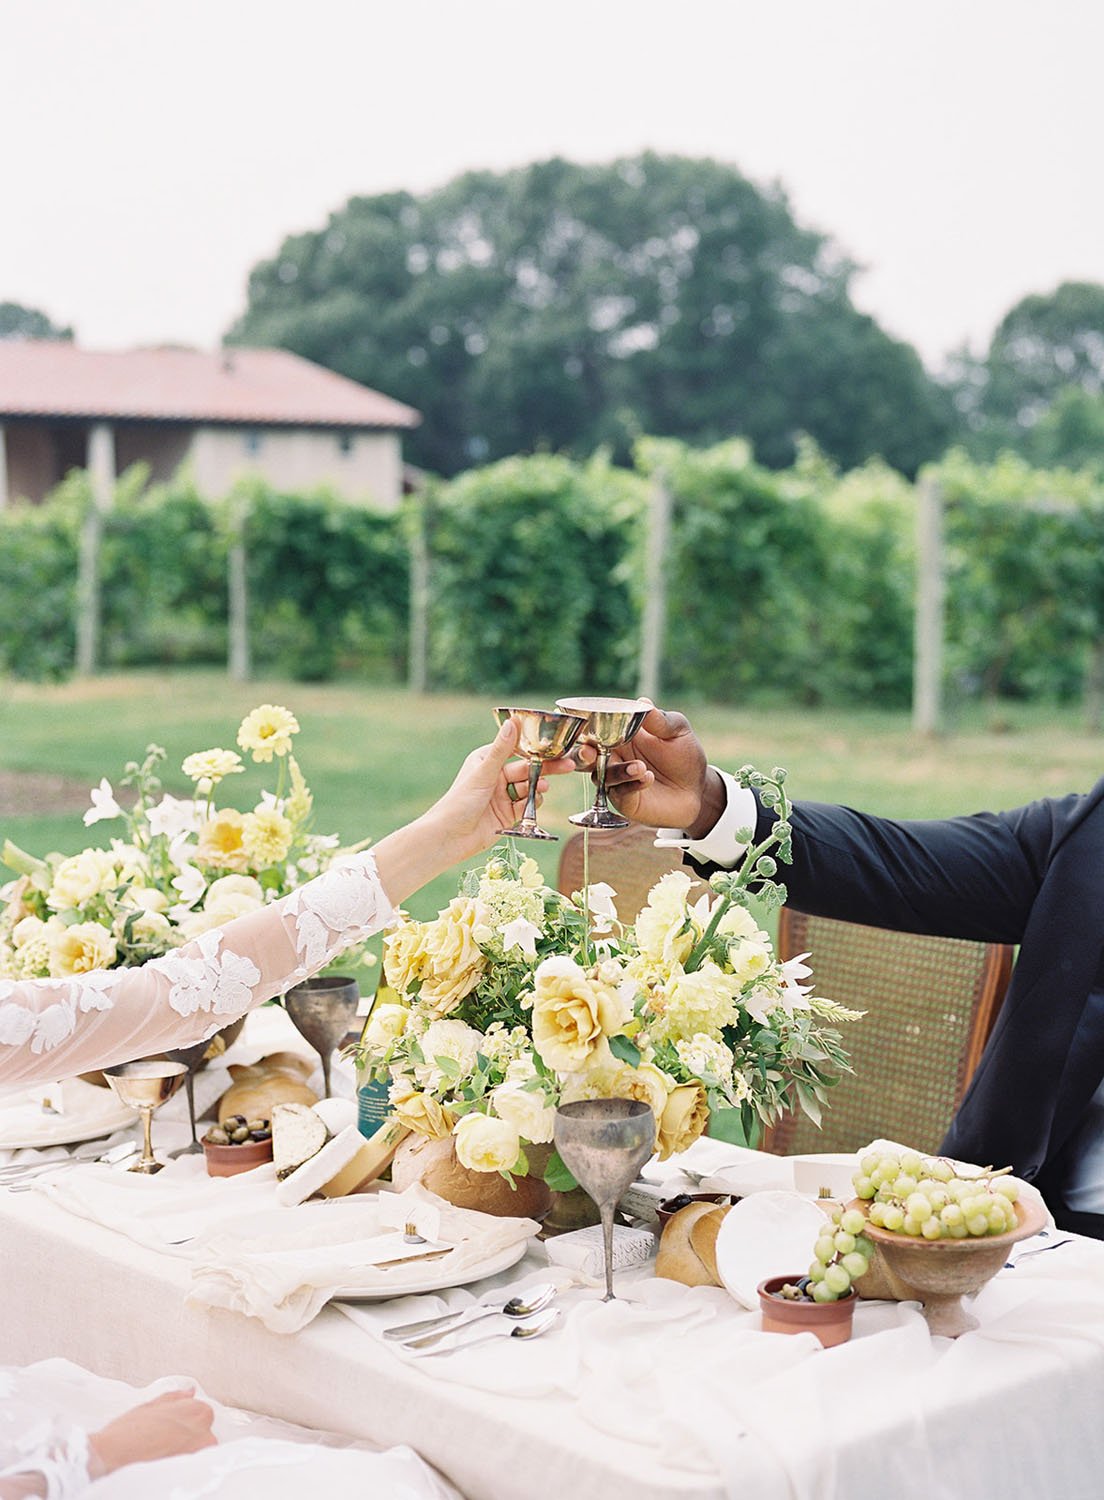  A bride and groom toasting with silver champagne flutes at their spring garden wedding reception in Wisconsin. 